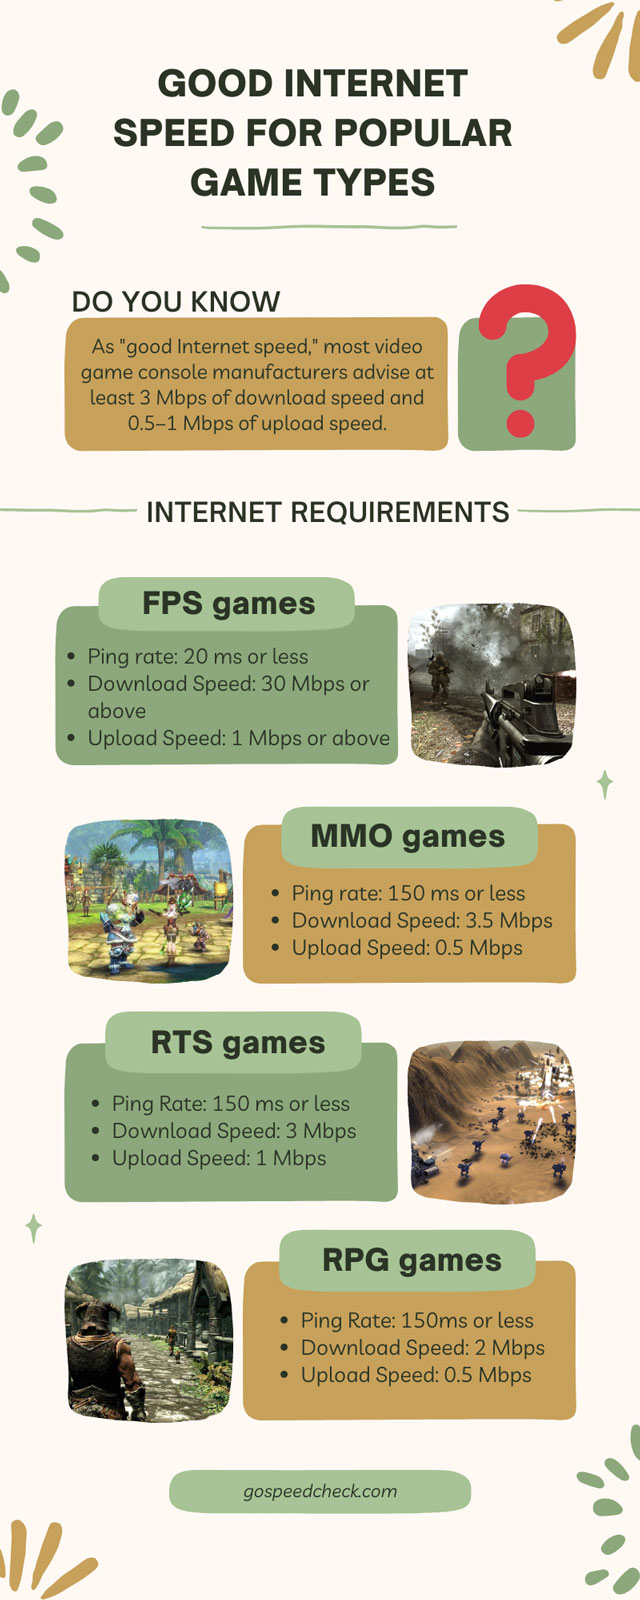 Ideal Internet speed for some game genres